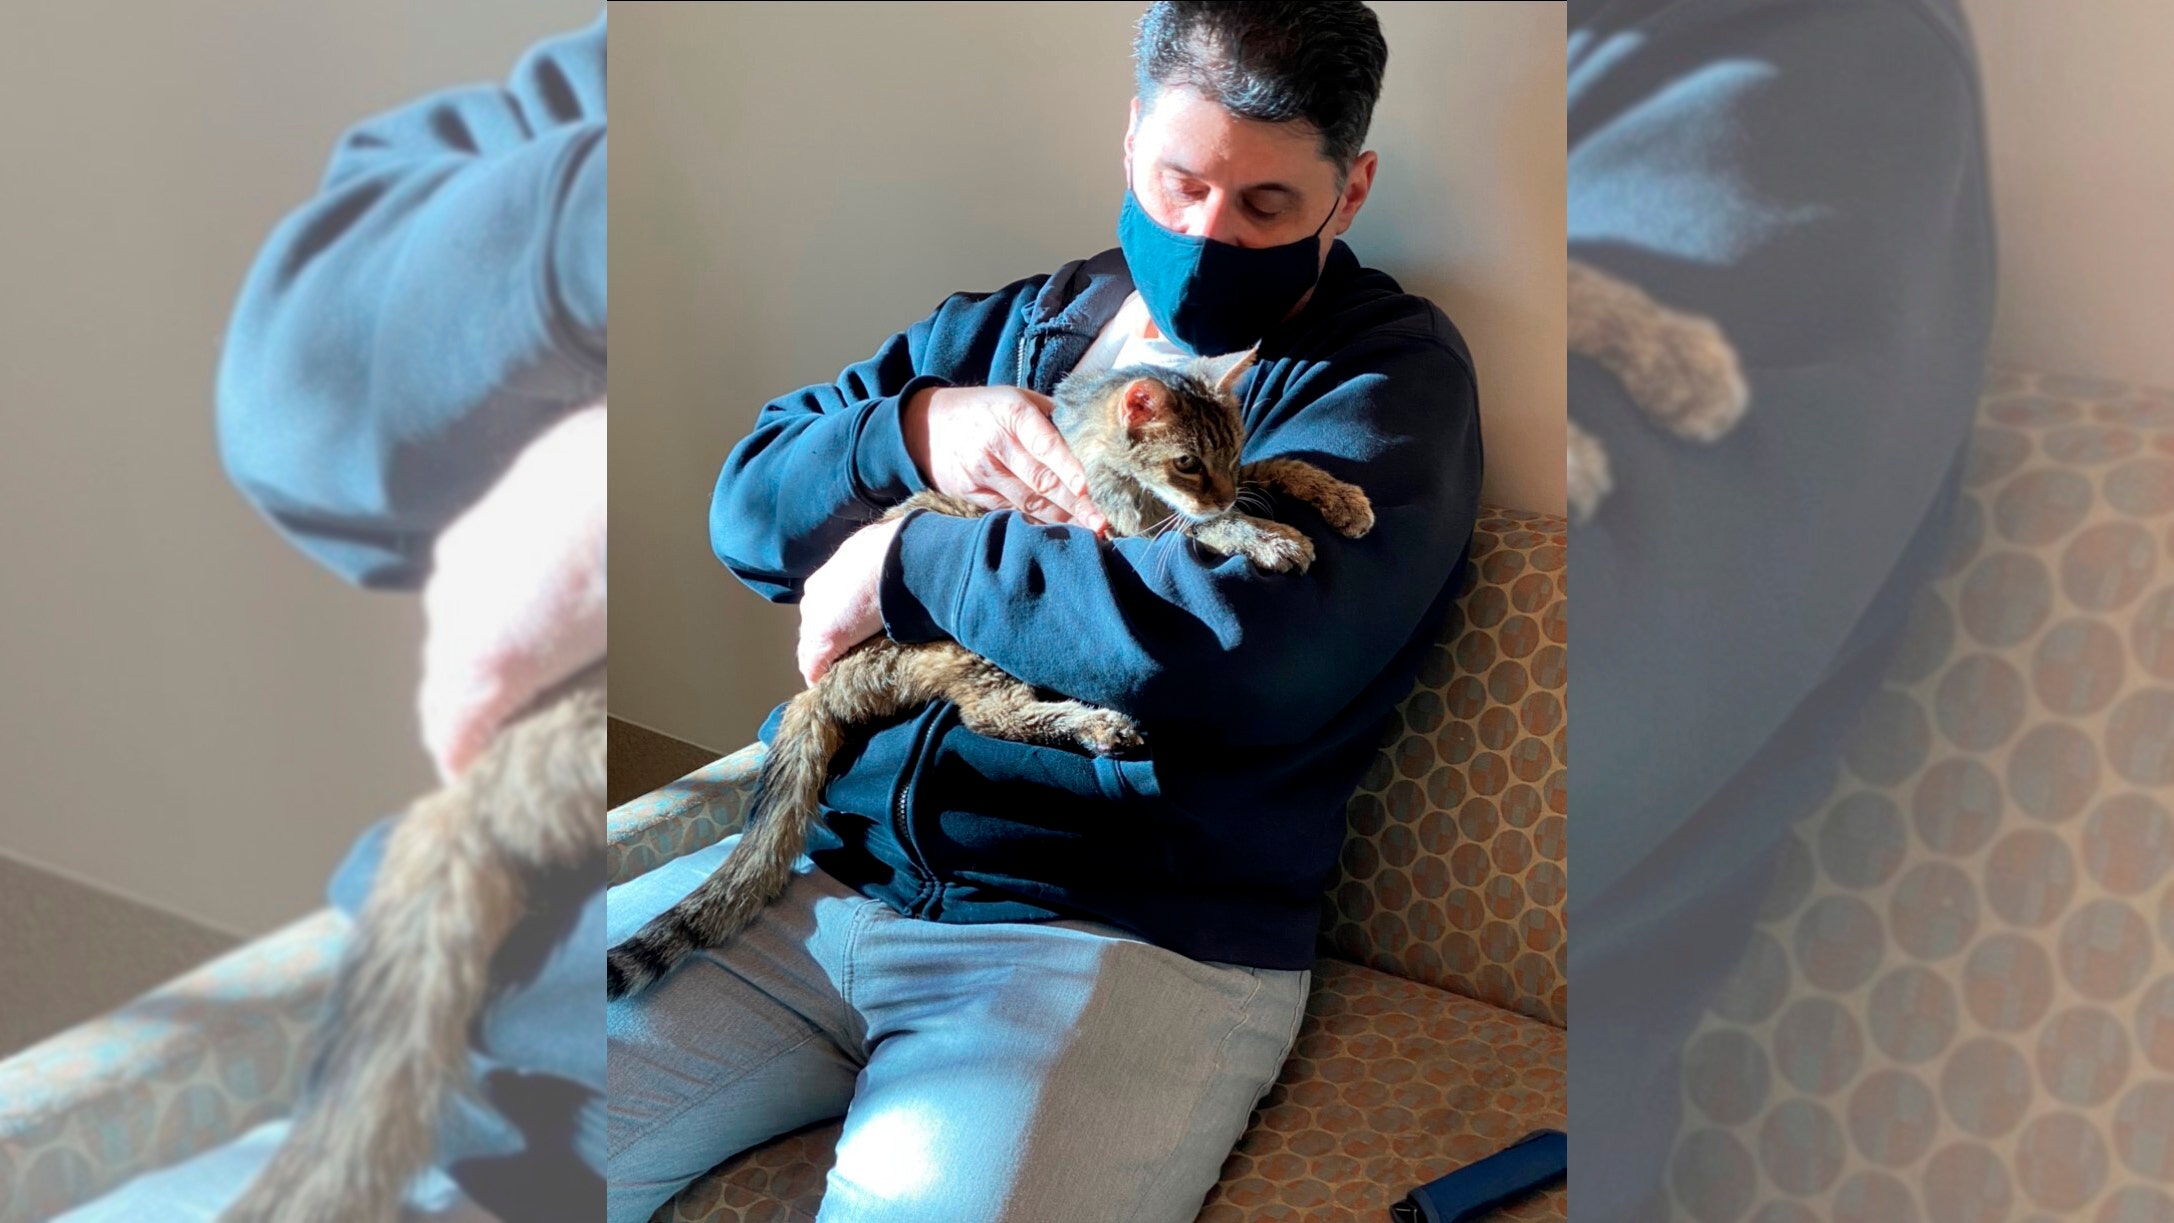 Man reunited with cat after it vanished 15 years ago: 'It was very emotional'